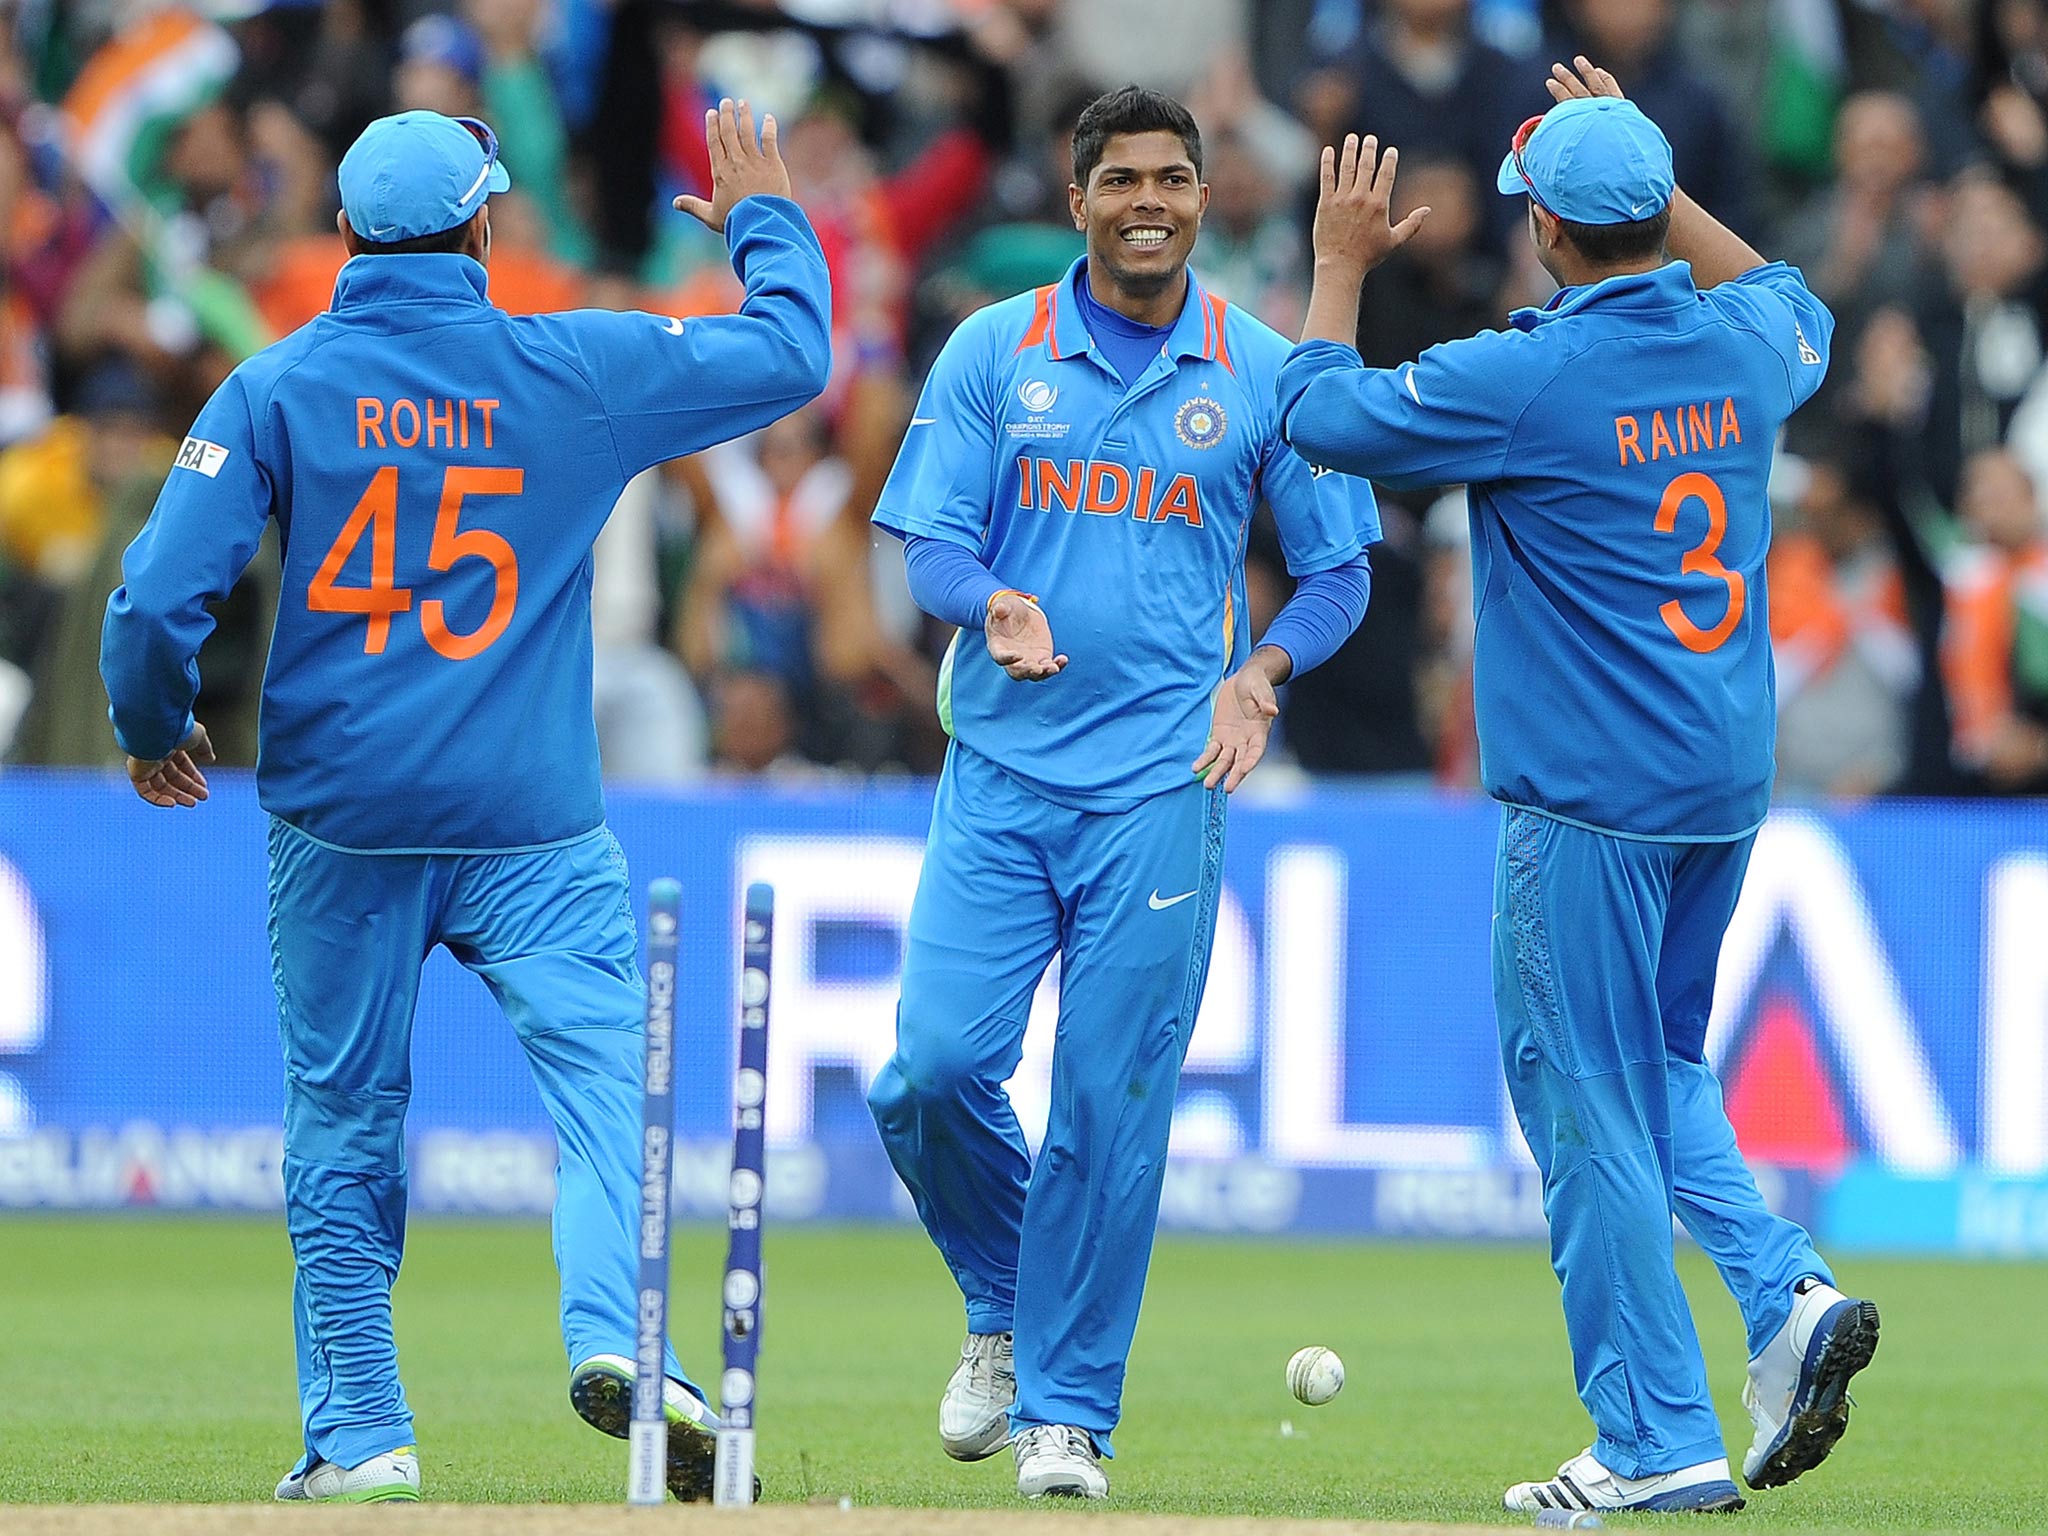 India's Suresh India's Umesh Yadav (C) celebrates with India's Suresh Raina (R) and India's Rohit Sharma after running out Pakistan's Mohammad Irfan during the 2013 ICC Champions